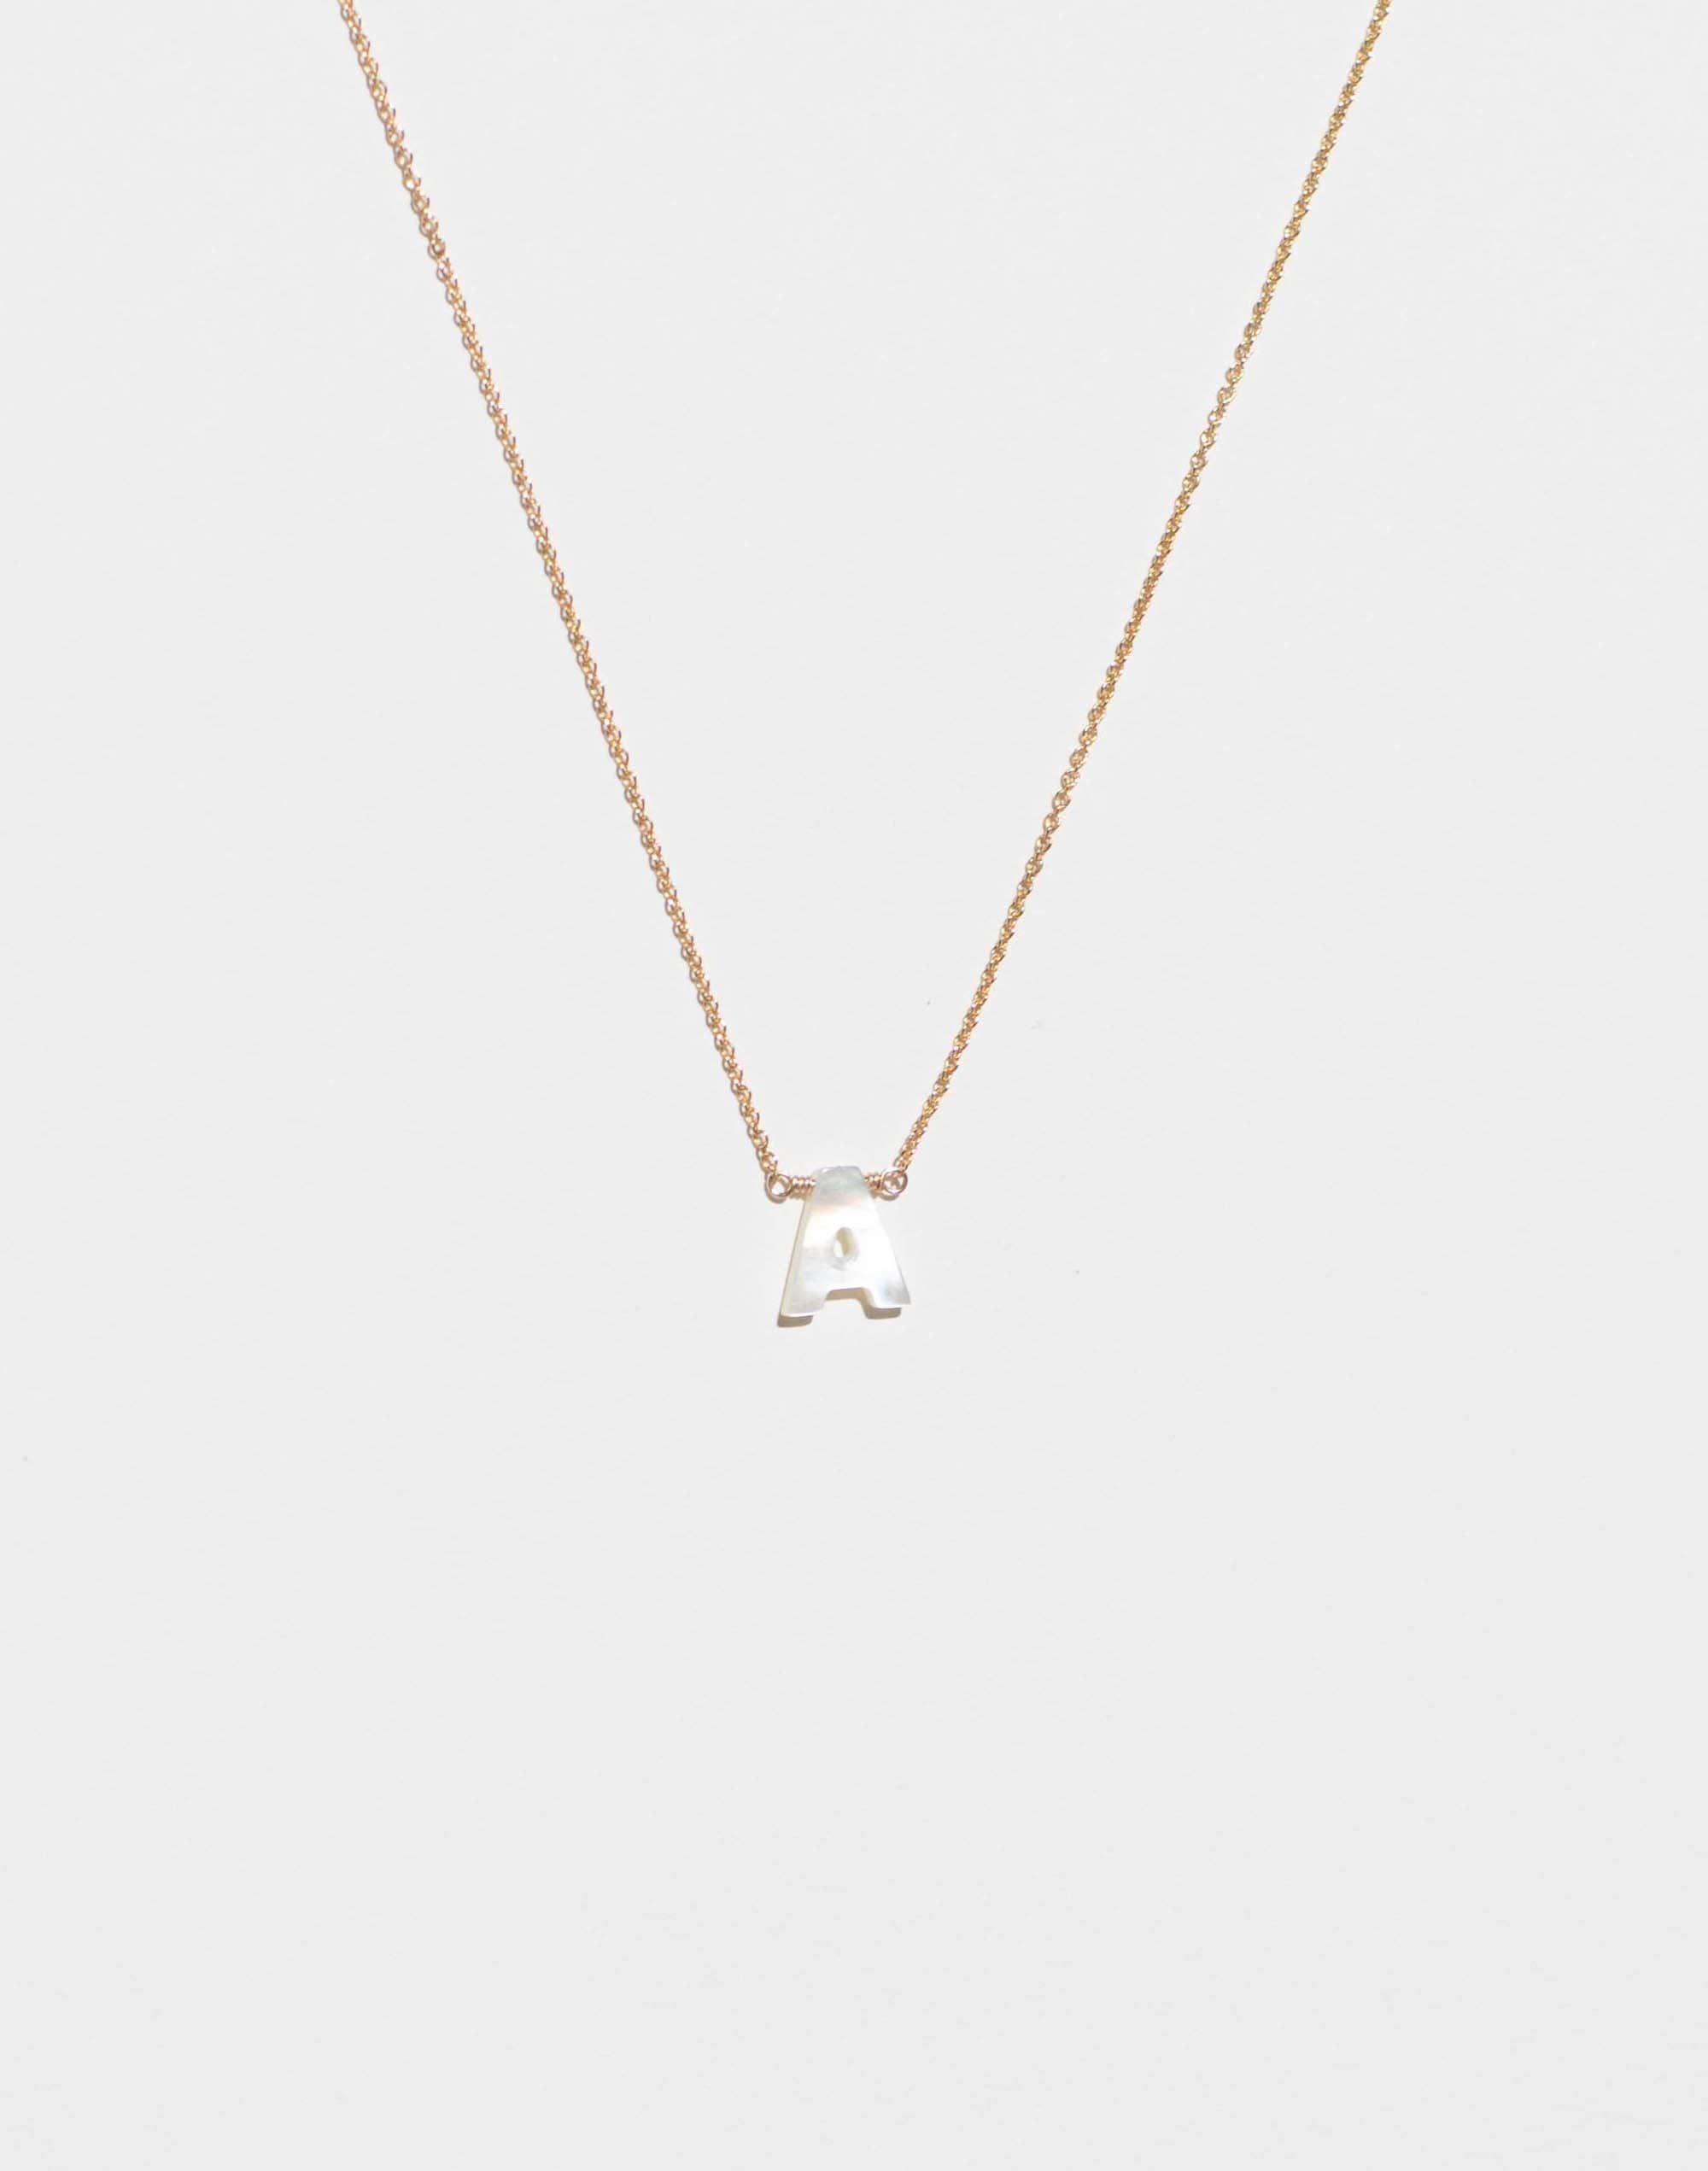 DREAMBOX The Initial Necklace